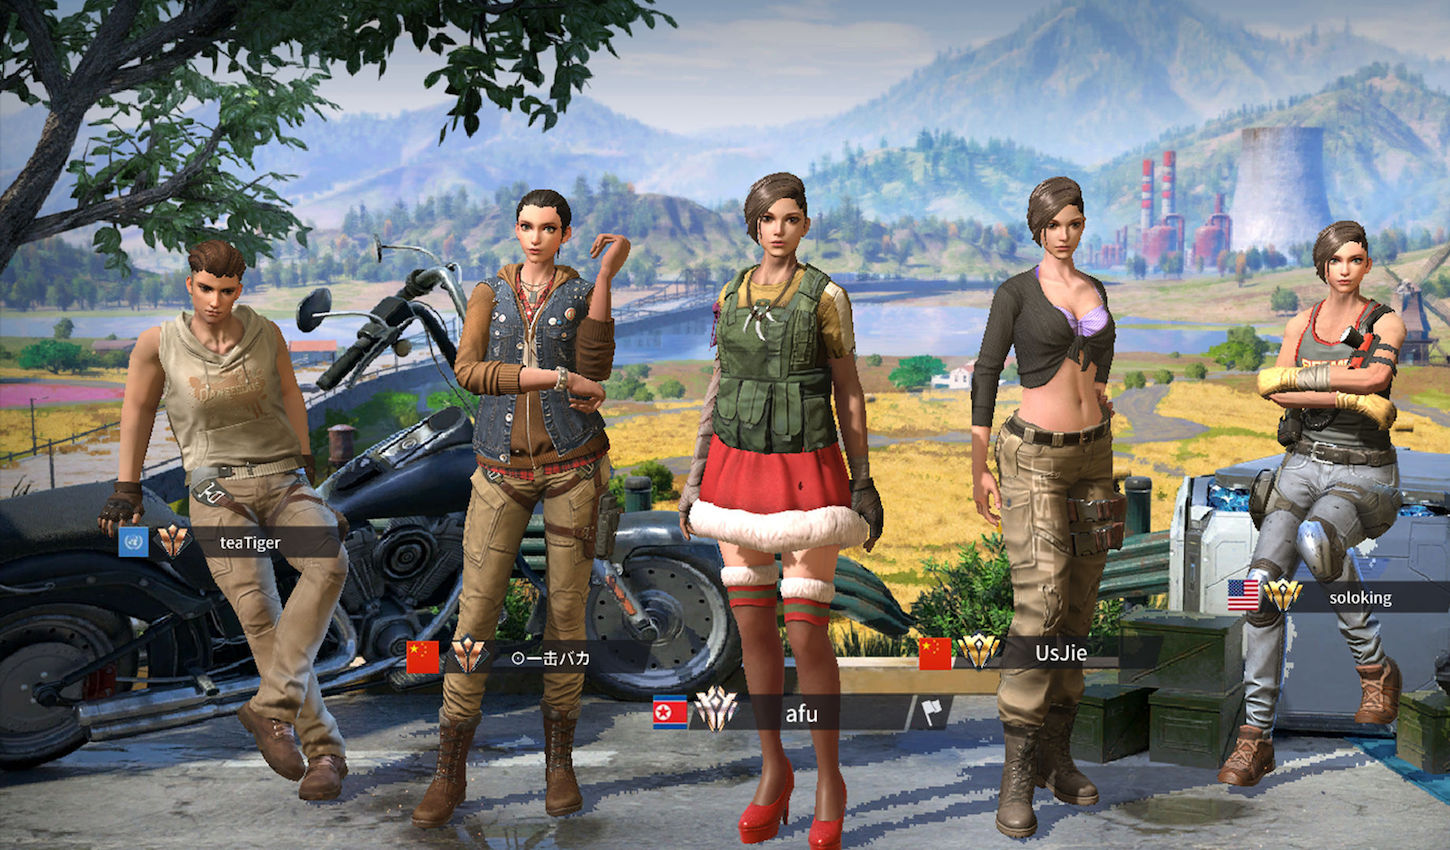 Follow The Official Link And Enjoy Playing The Rules Of Survival Game